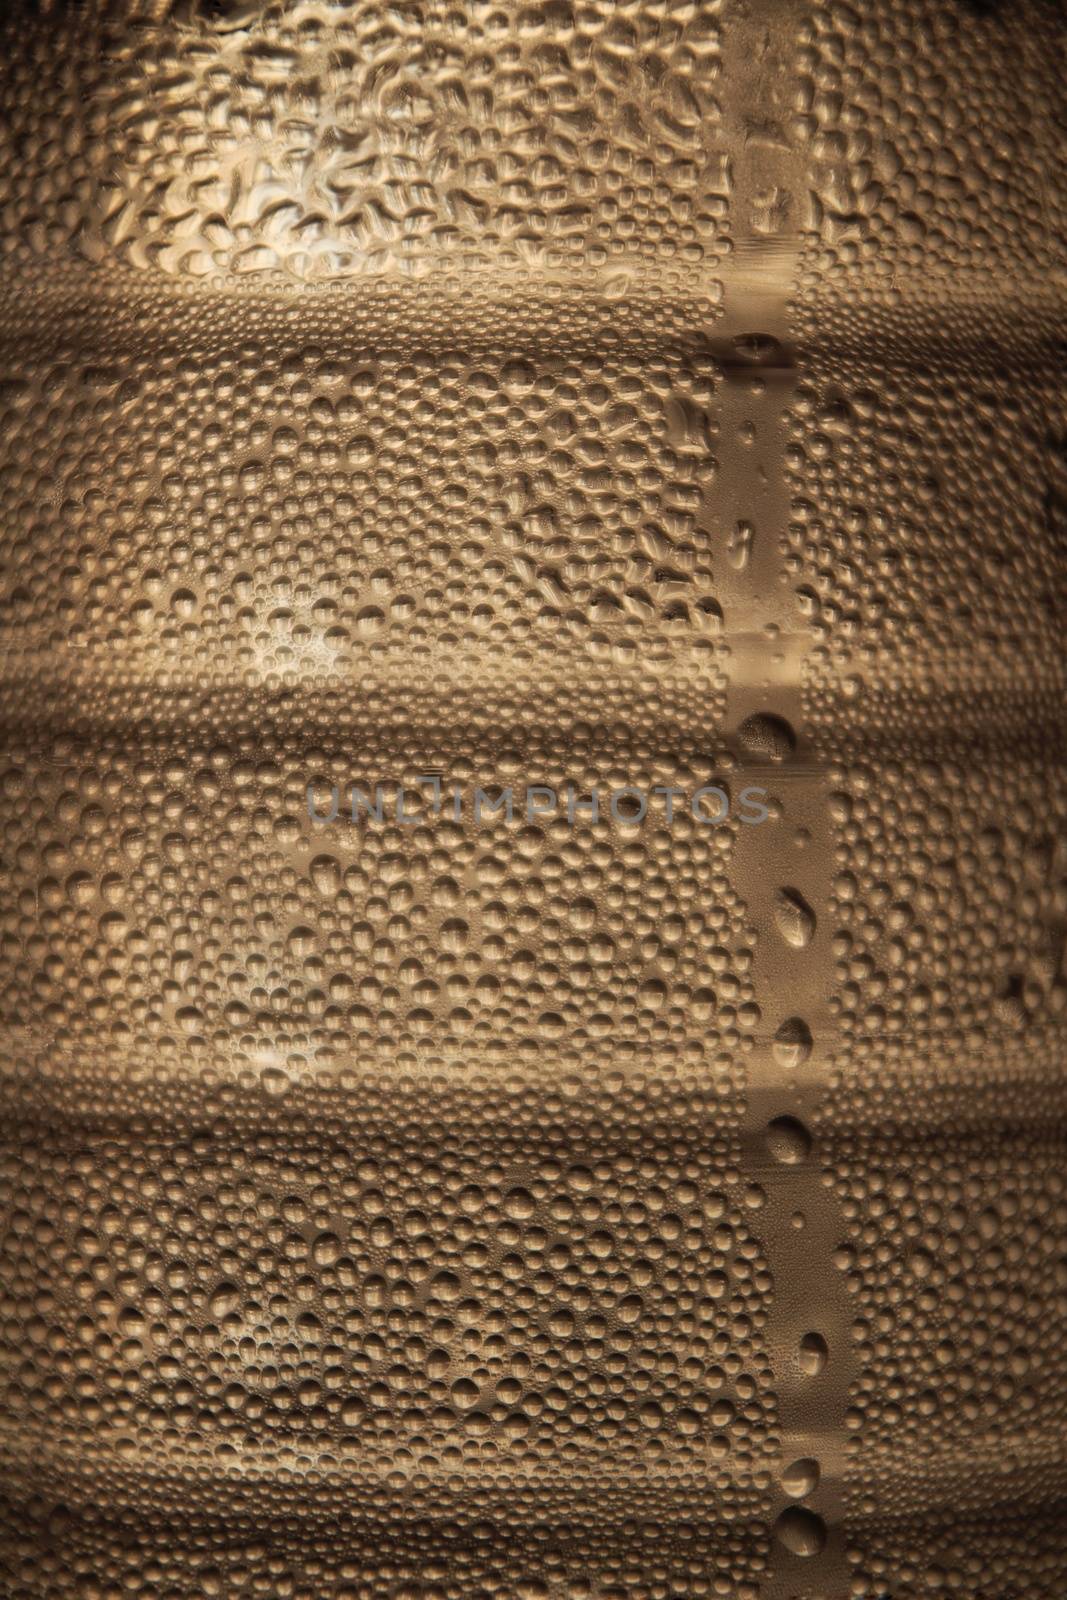 Plastic Water bottle texture with condensed drops by soniabonet